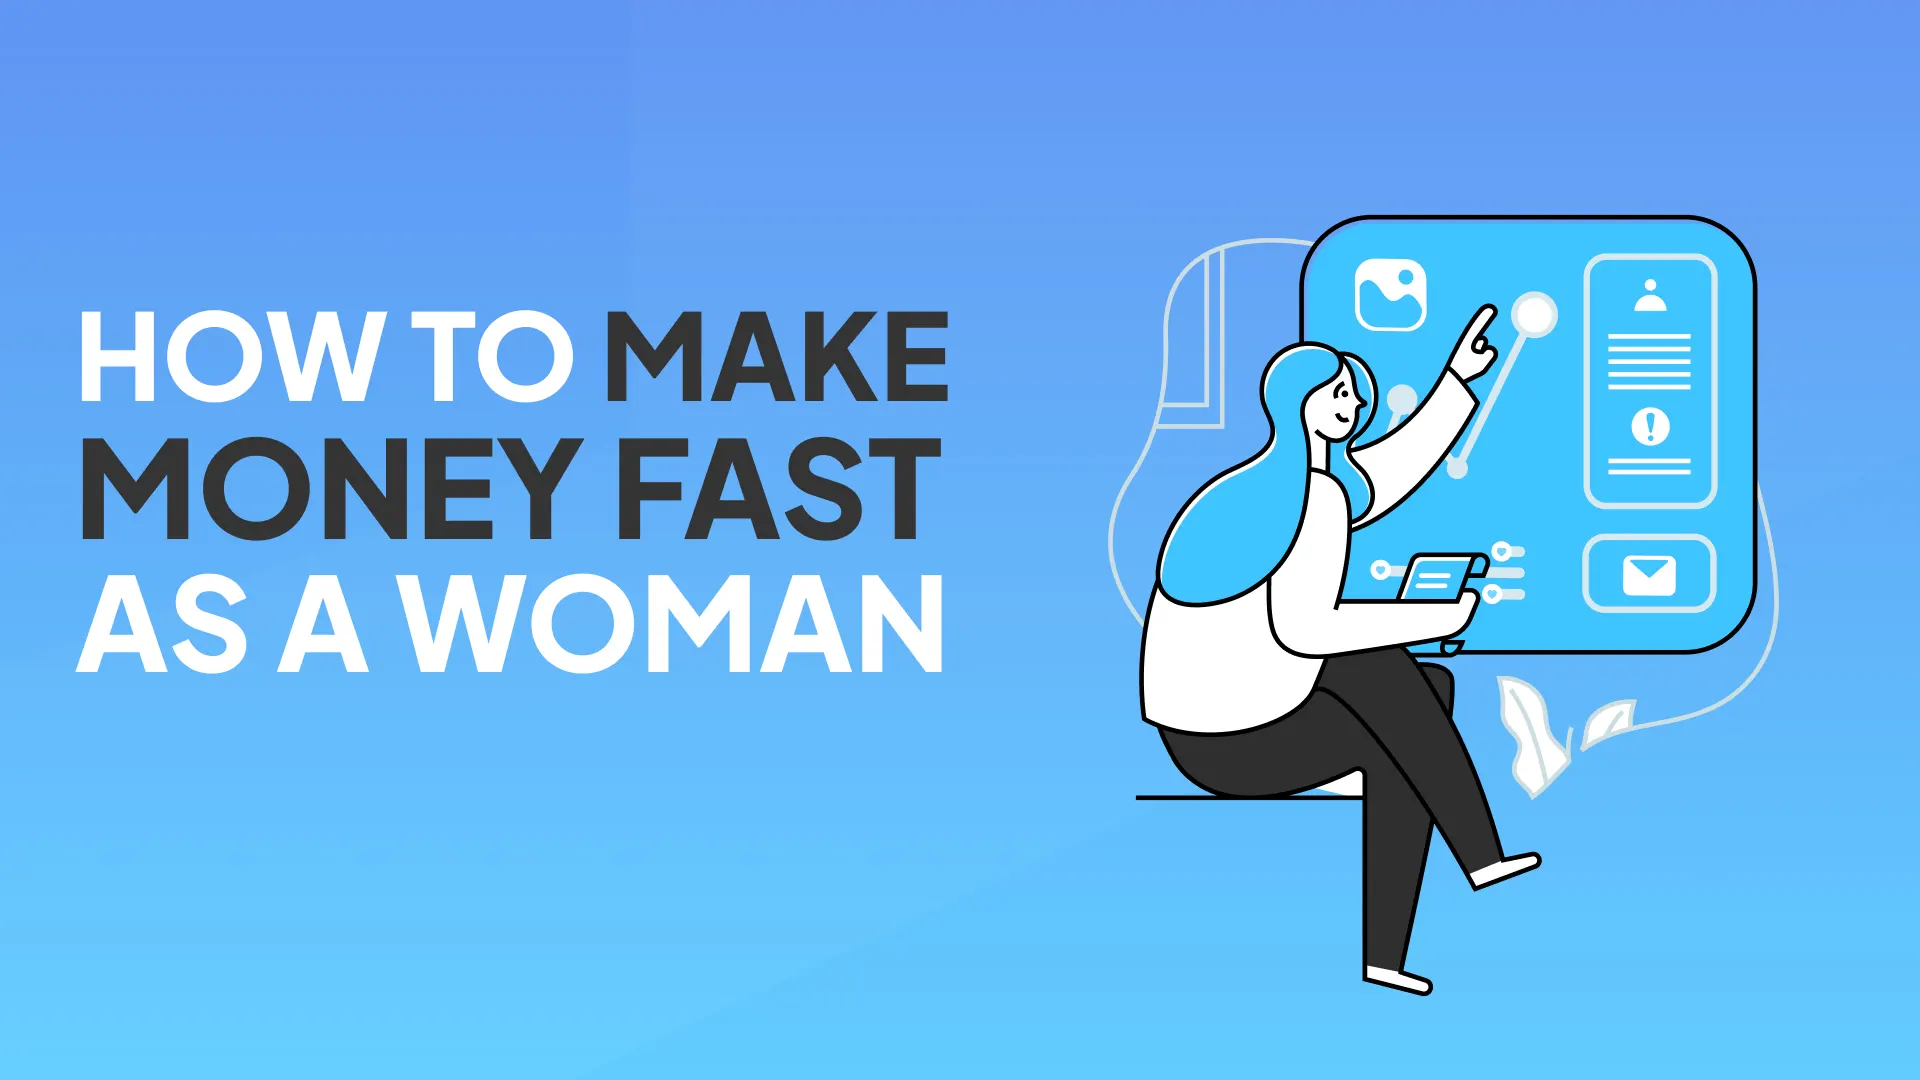 How Can A Woman Make Quick Money Fast?